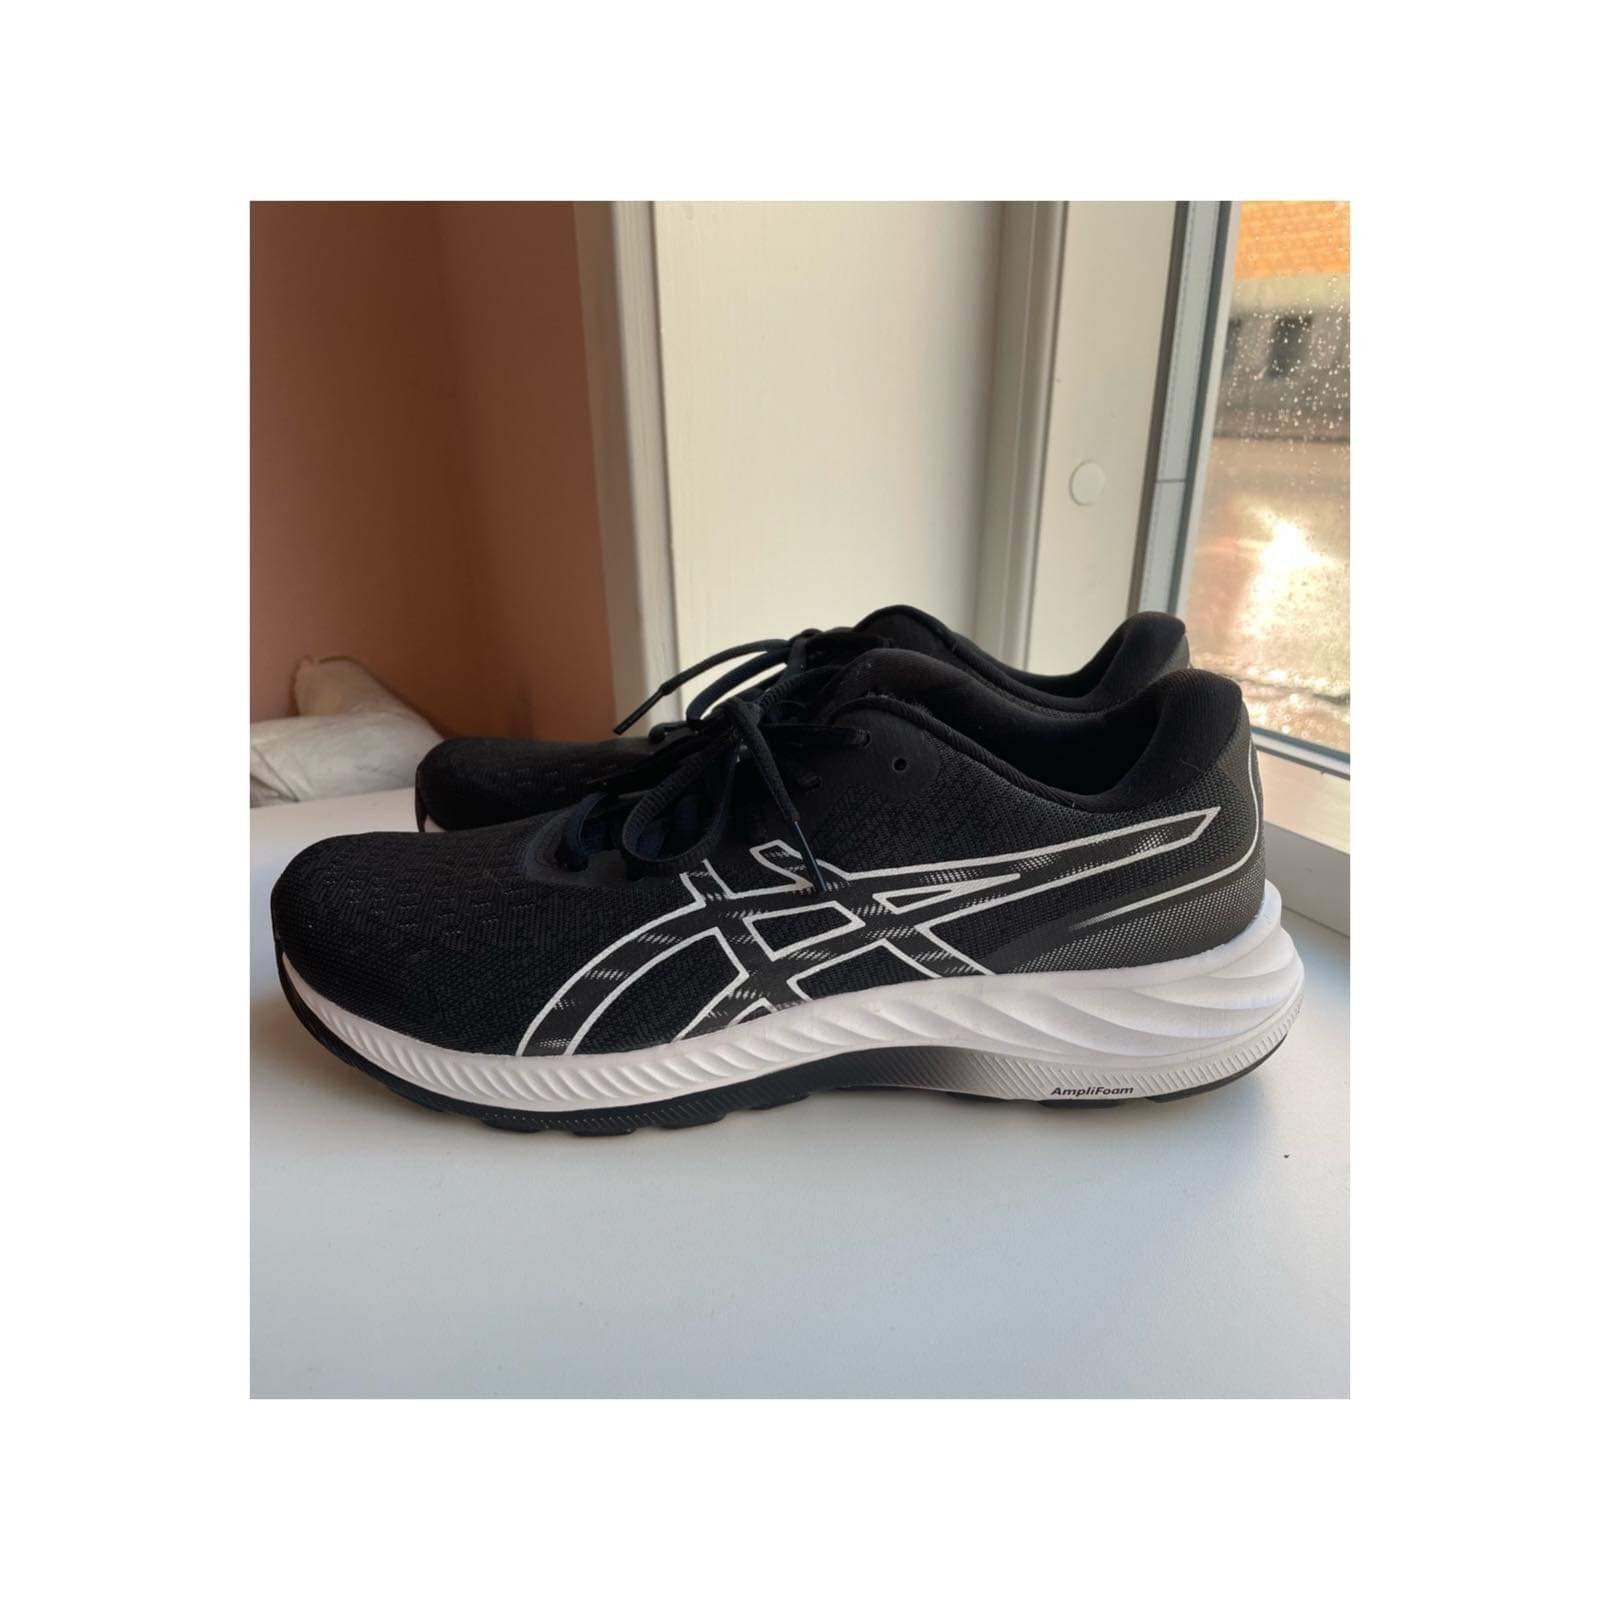 Asics - Sneakers - Size: 42